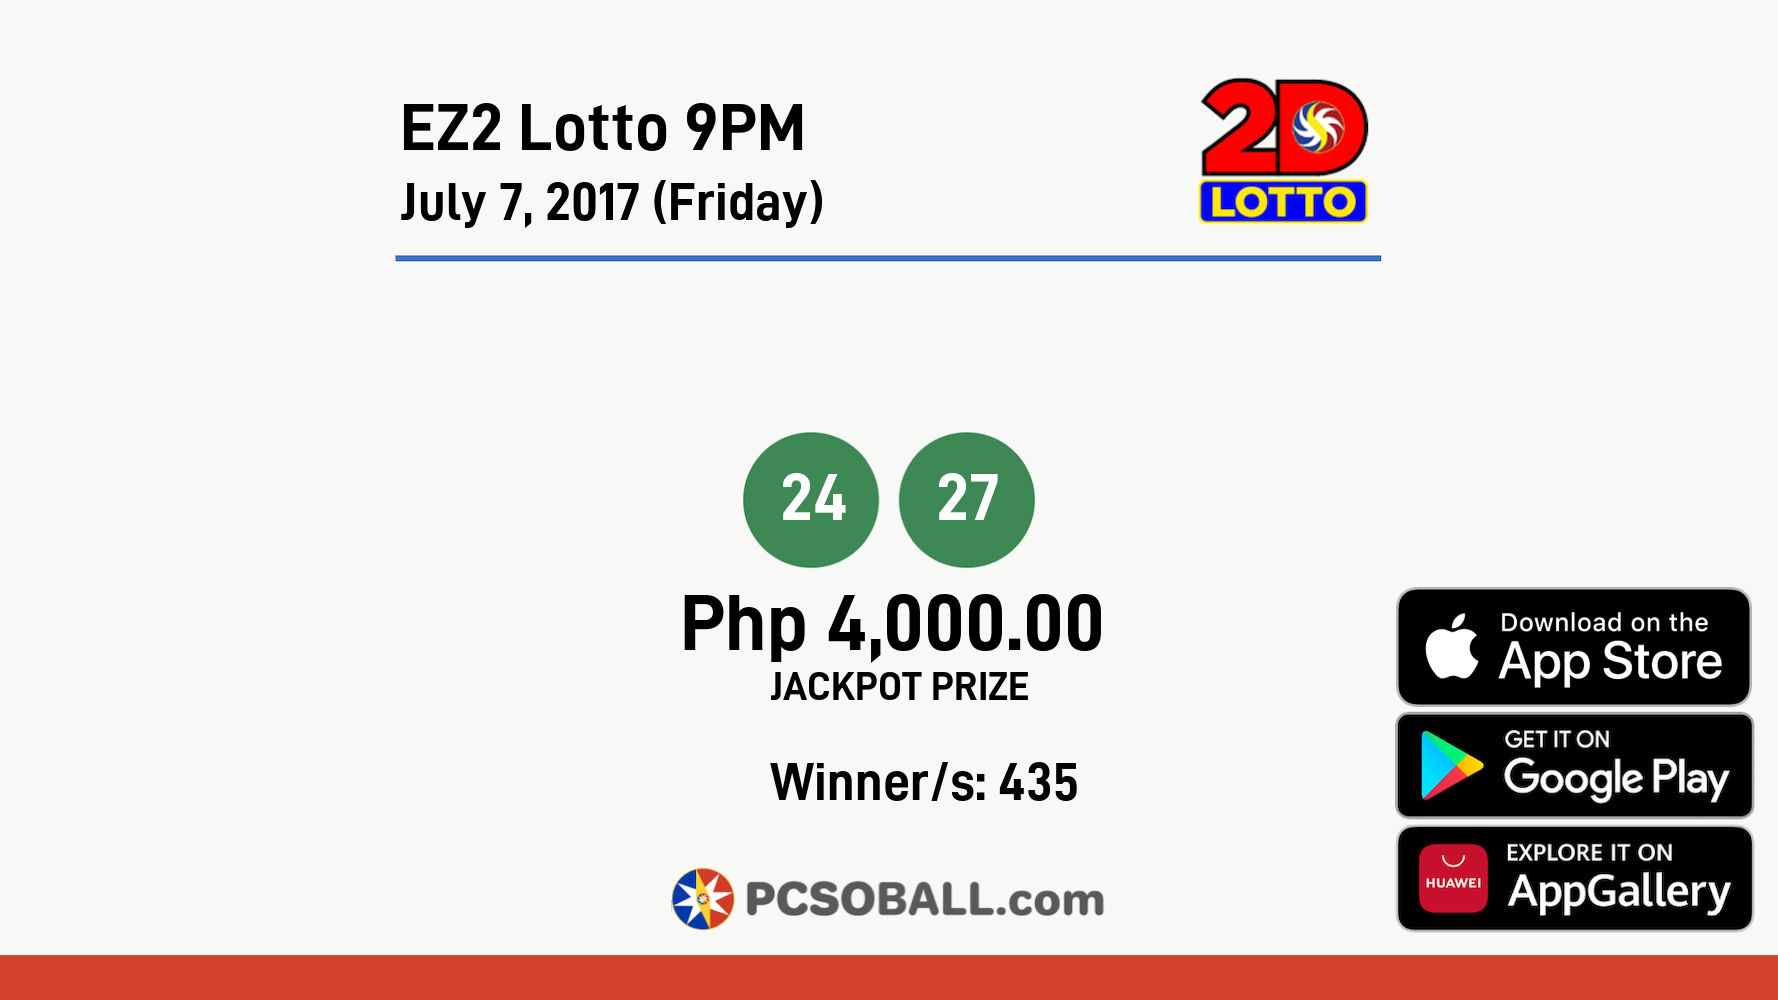 EZ2 Lotto 9PM July 7, 2017 (Friday) Result